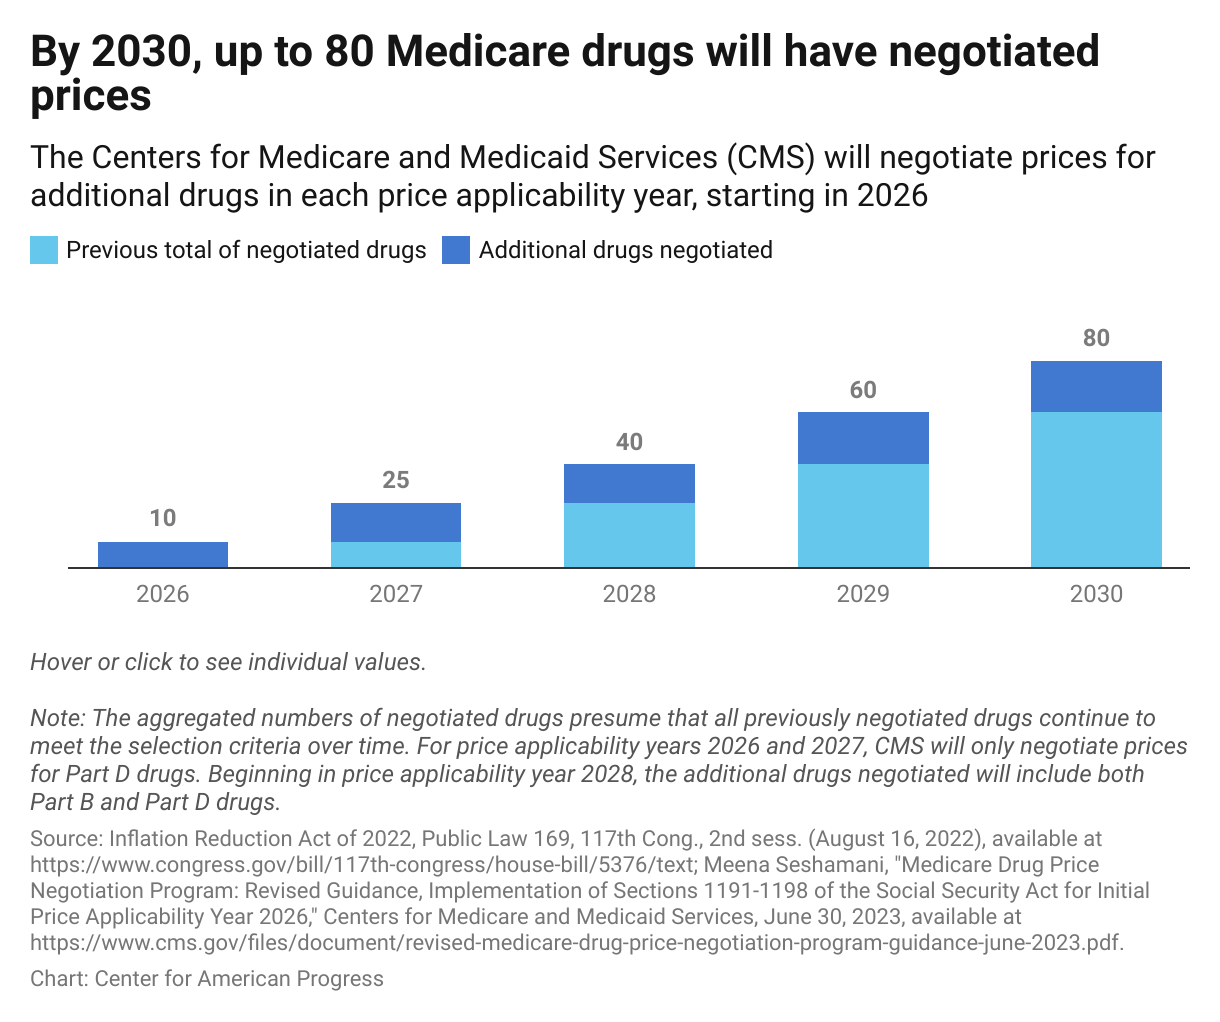 Stacked bar chart showing the number of drugs negotiated in each price applicability year, along with a running total.